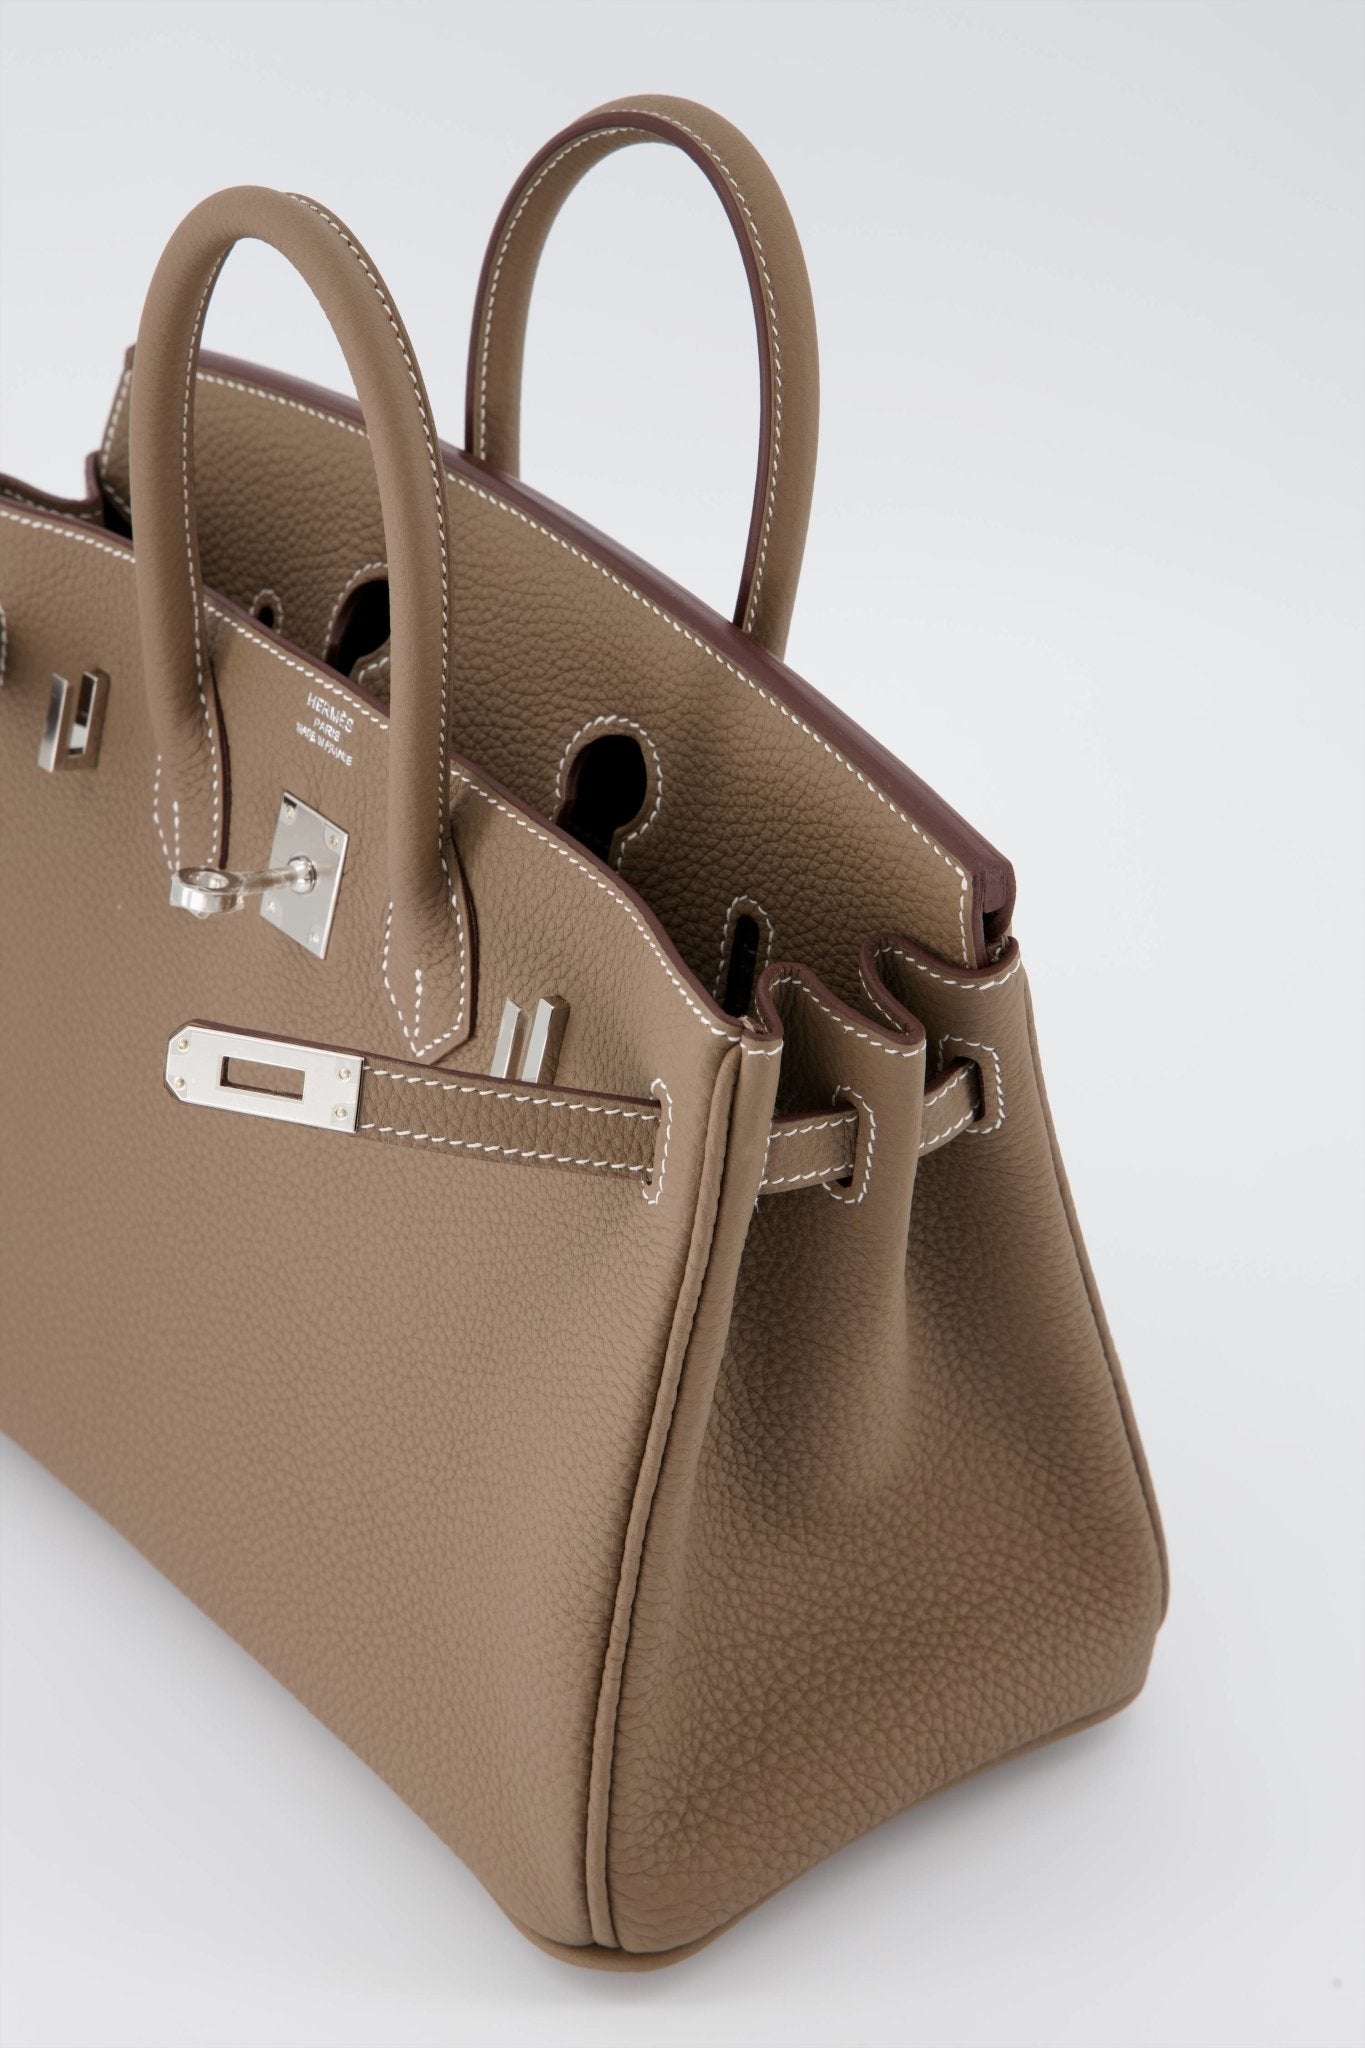 AN ÉTOUPE TOGO LEATHER BIRKIN 25 WITH GOLD HARDWARE